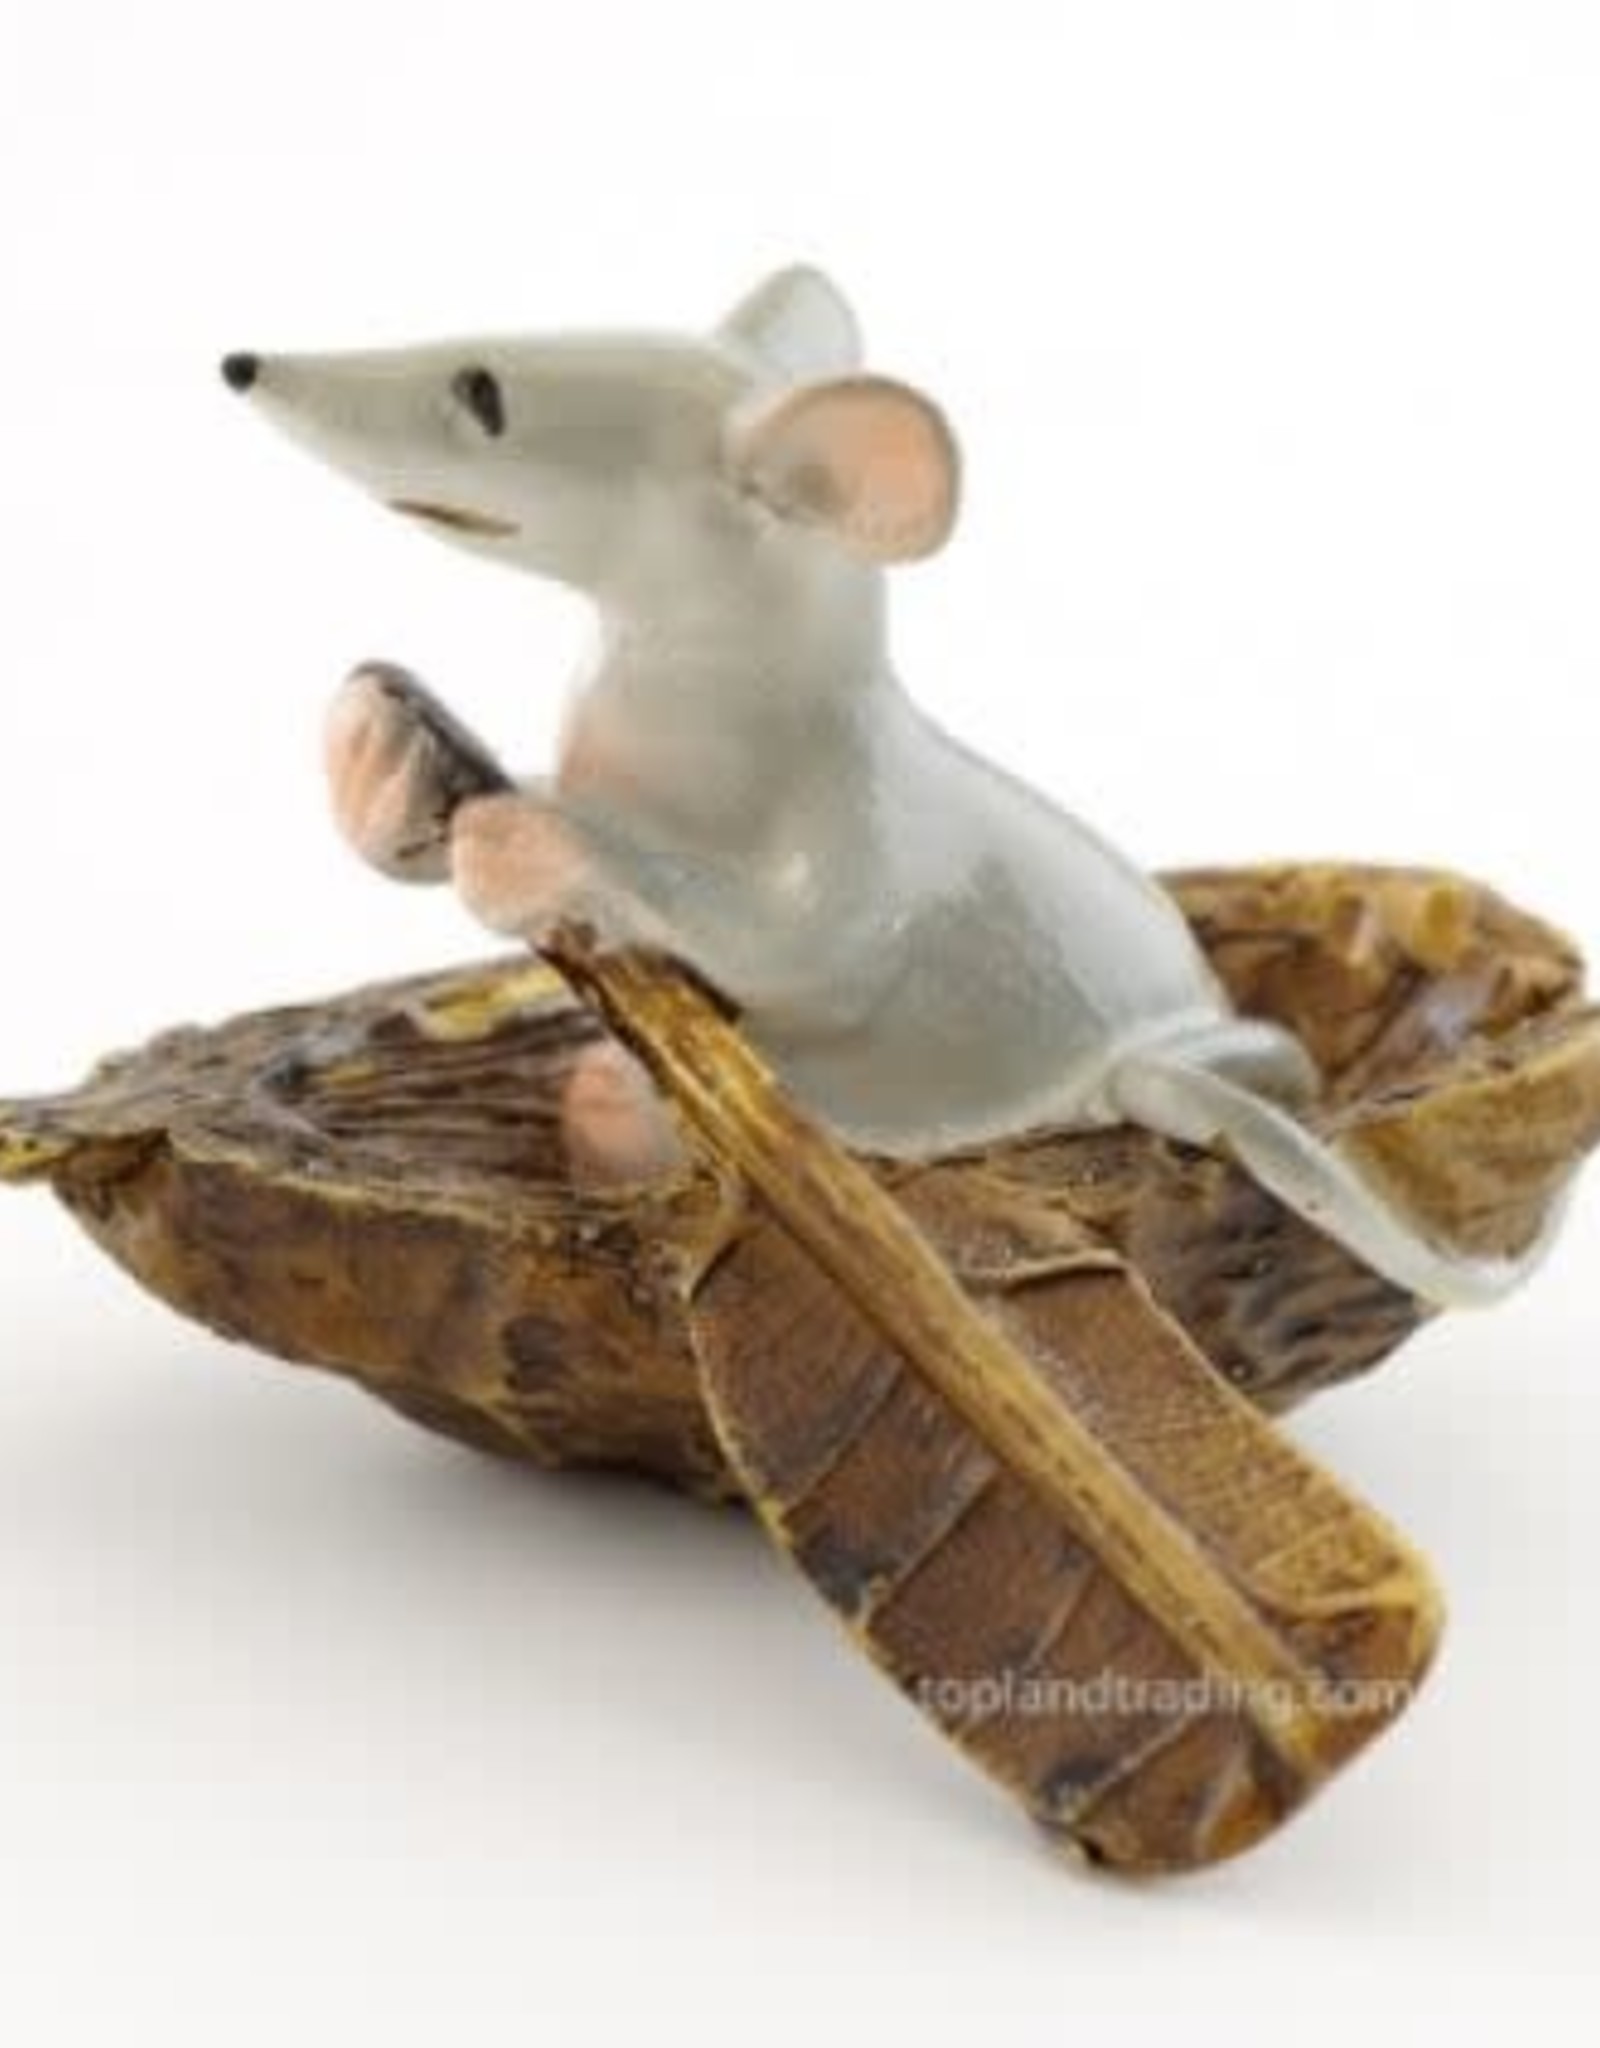 Top Land Trading MOUSE ROWING BOAT